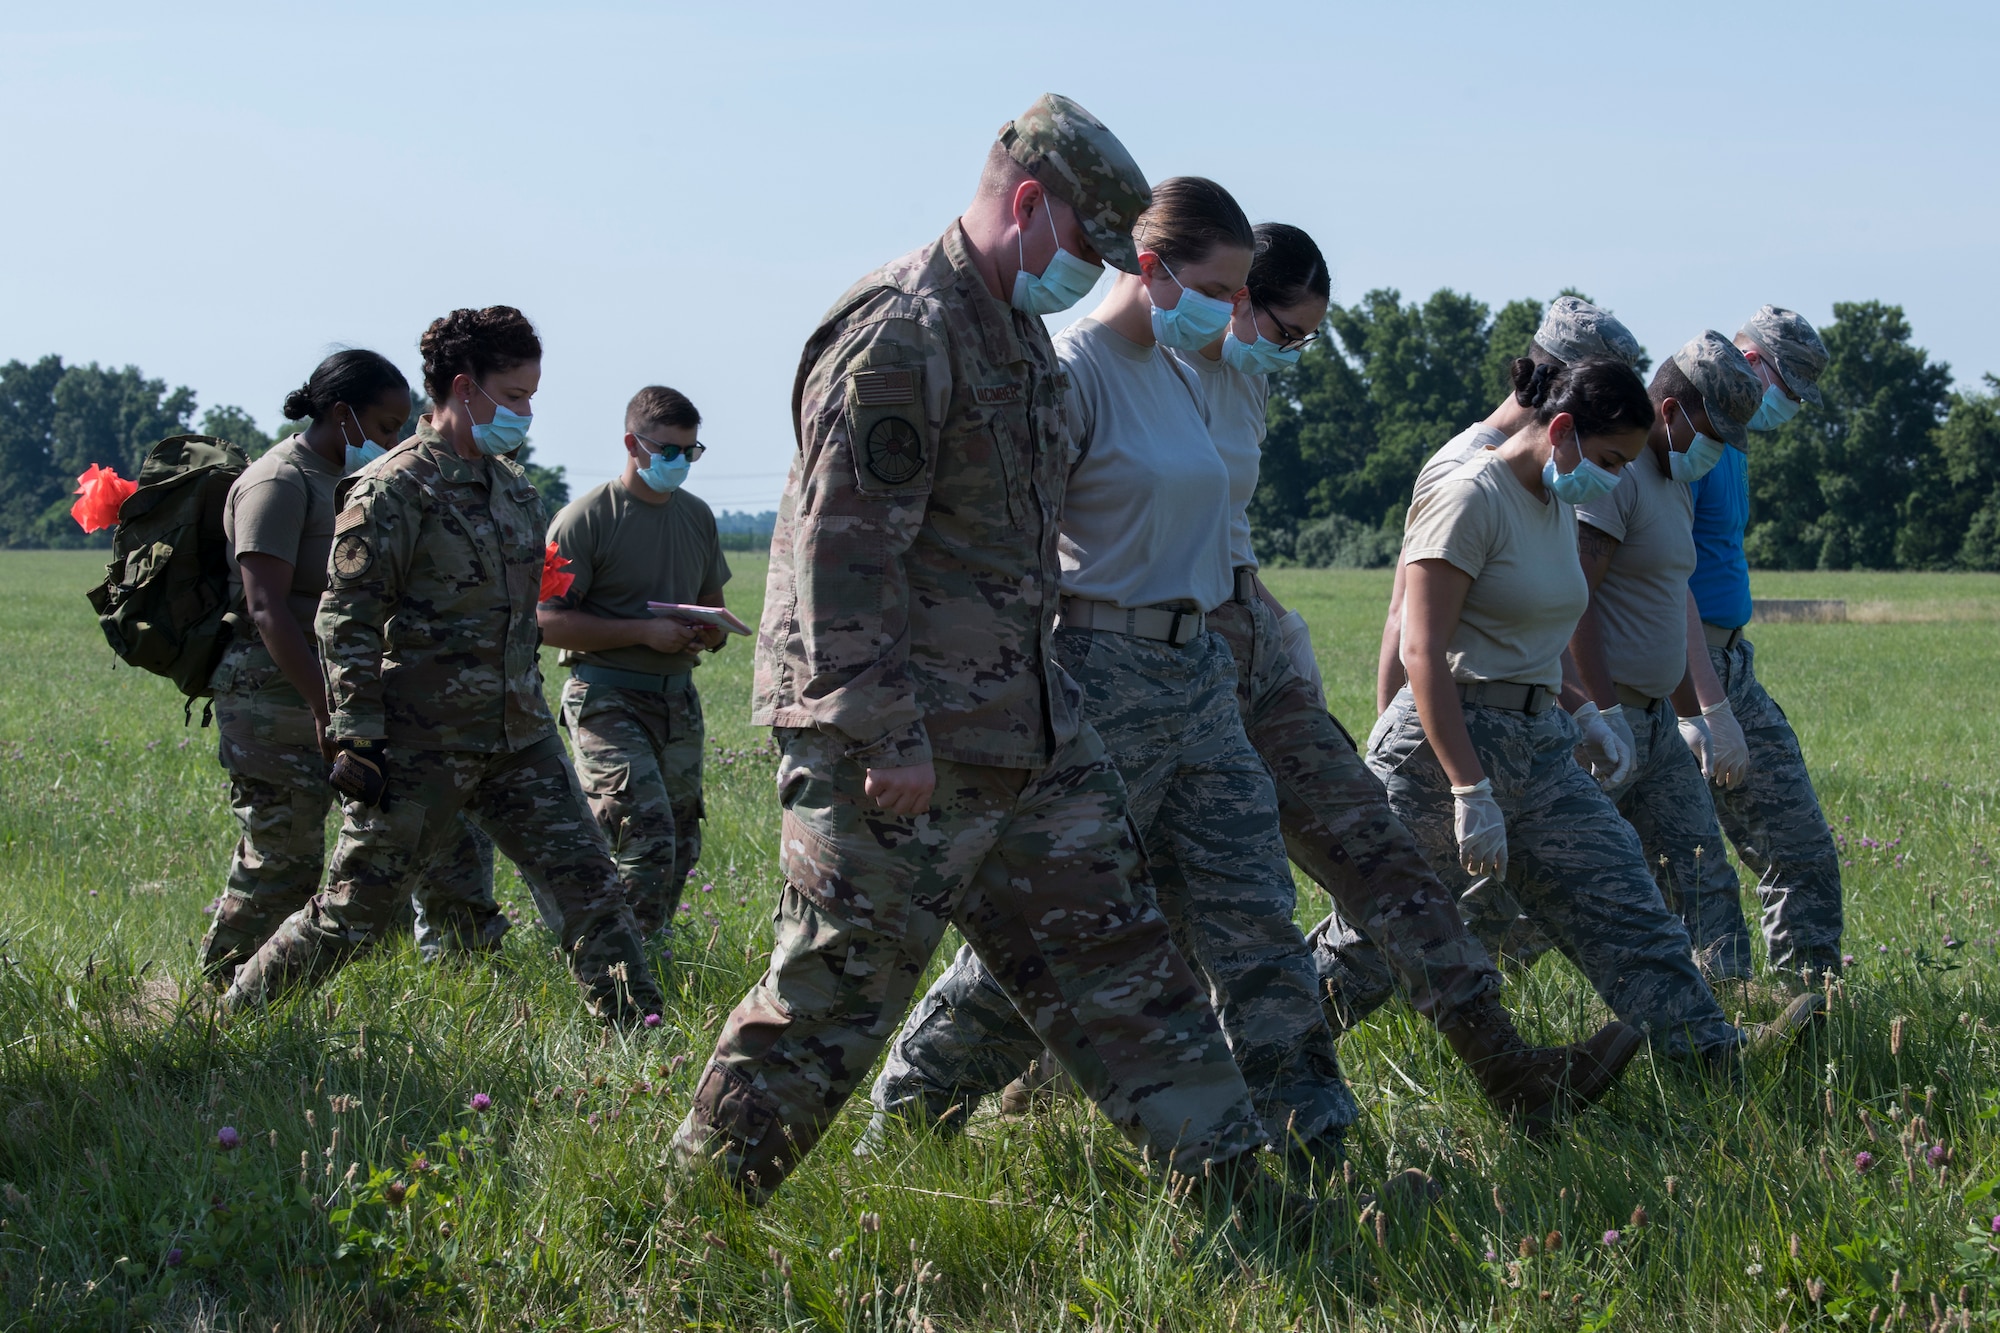 Airmen from the 436th Force Support Squadron conduct a search during a search-and-recovery exercise June 28, 2019, at Dover Air Force Base, Del. The team of 11 was tasked with surveying a field as part of an aircraft mishap simulation. (U.S. Air Force photo by Senior Airman Christopher Quail)